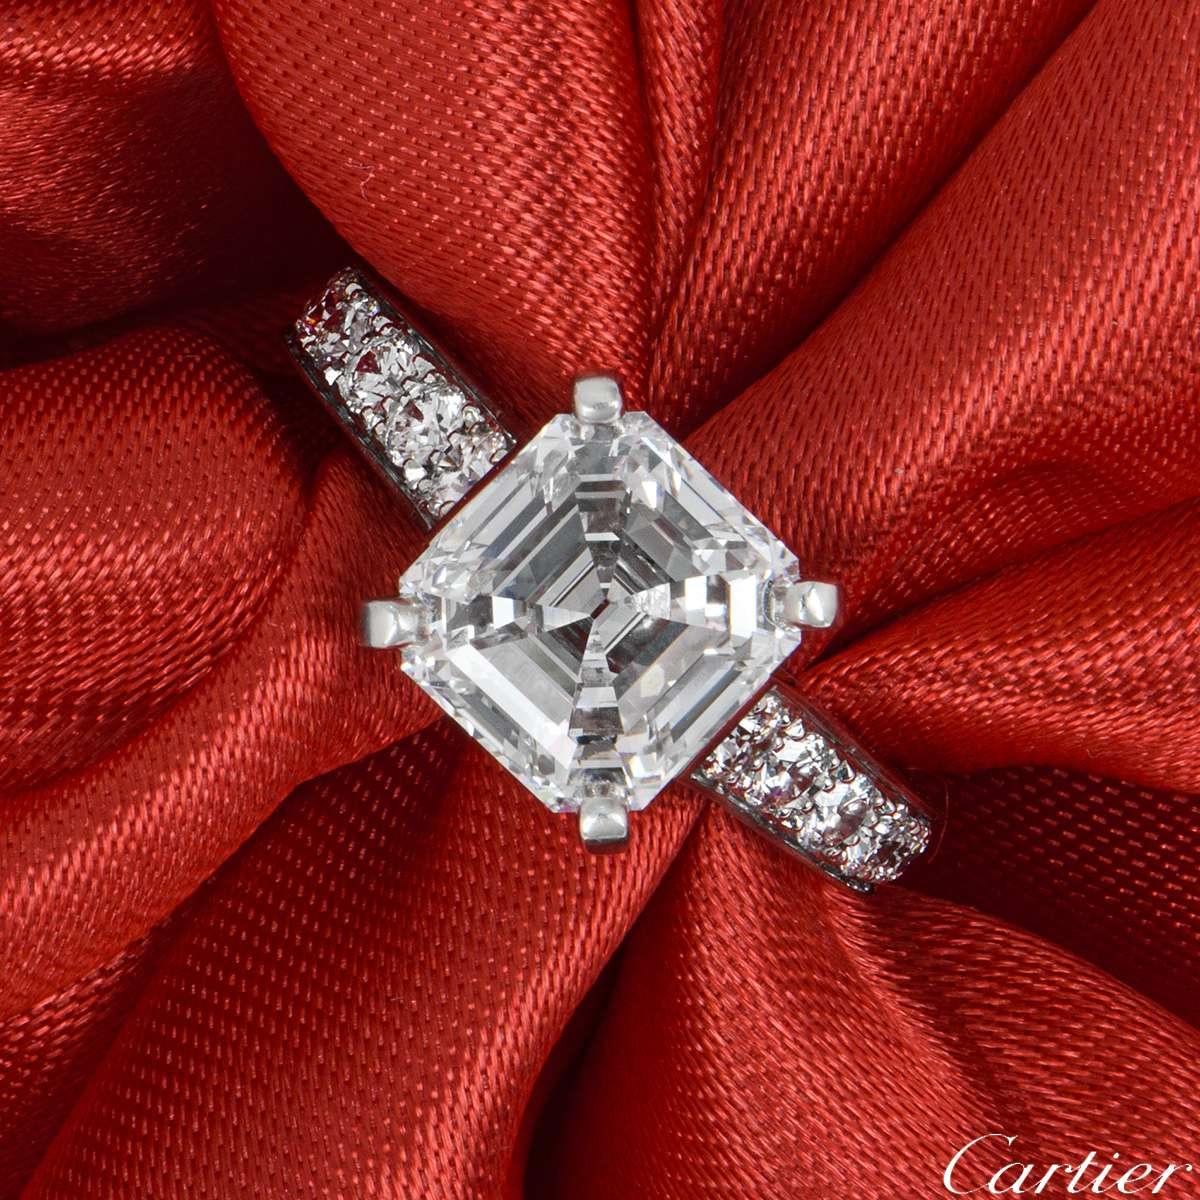 An exquisite diamond ring from the Solitaire 1895 collection by Cartier. The ring is set to the centre with a 2.76ct asscher cut diamond, D colour and IF clarity (Internally Flawless). There are 18 round brilliant cut diamonds set to the shoulders,